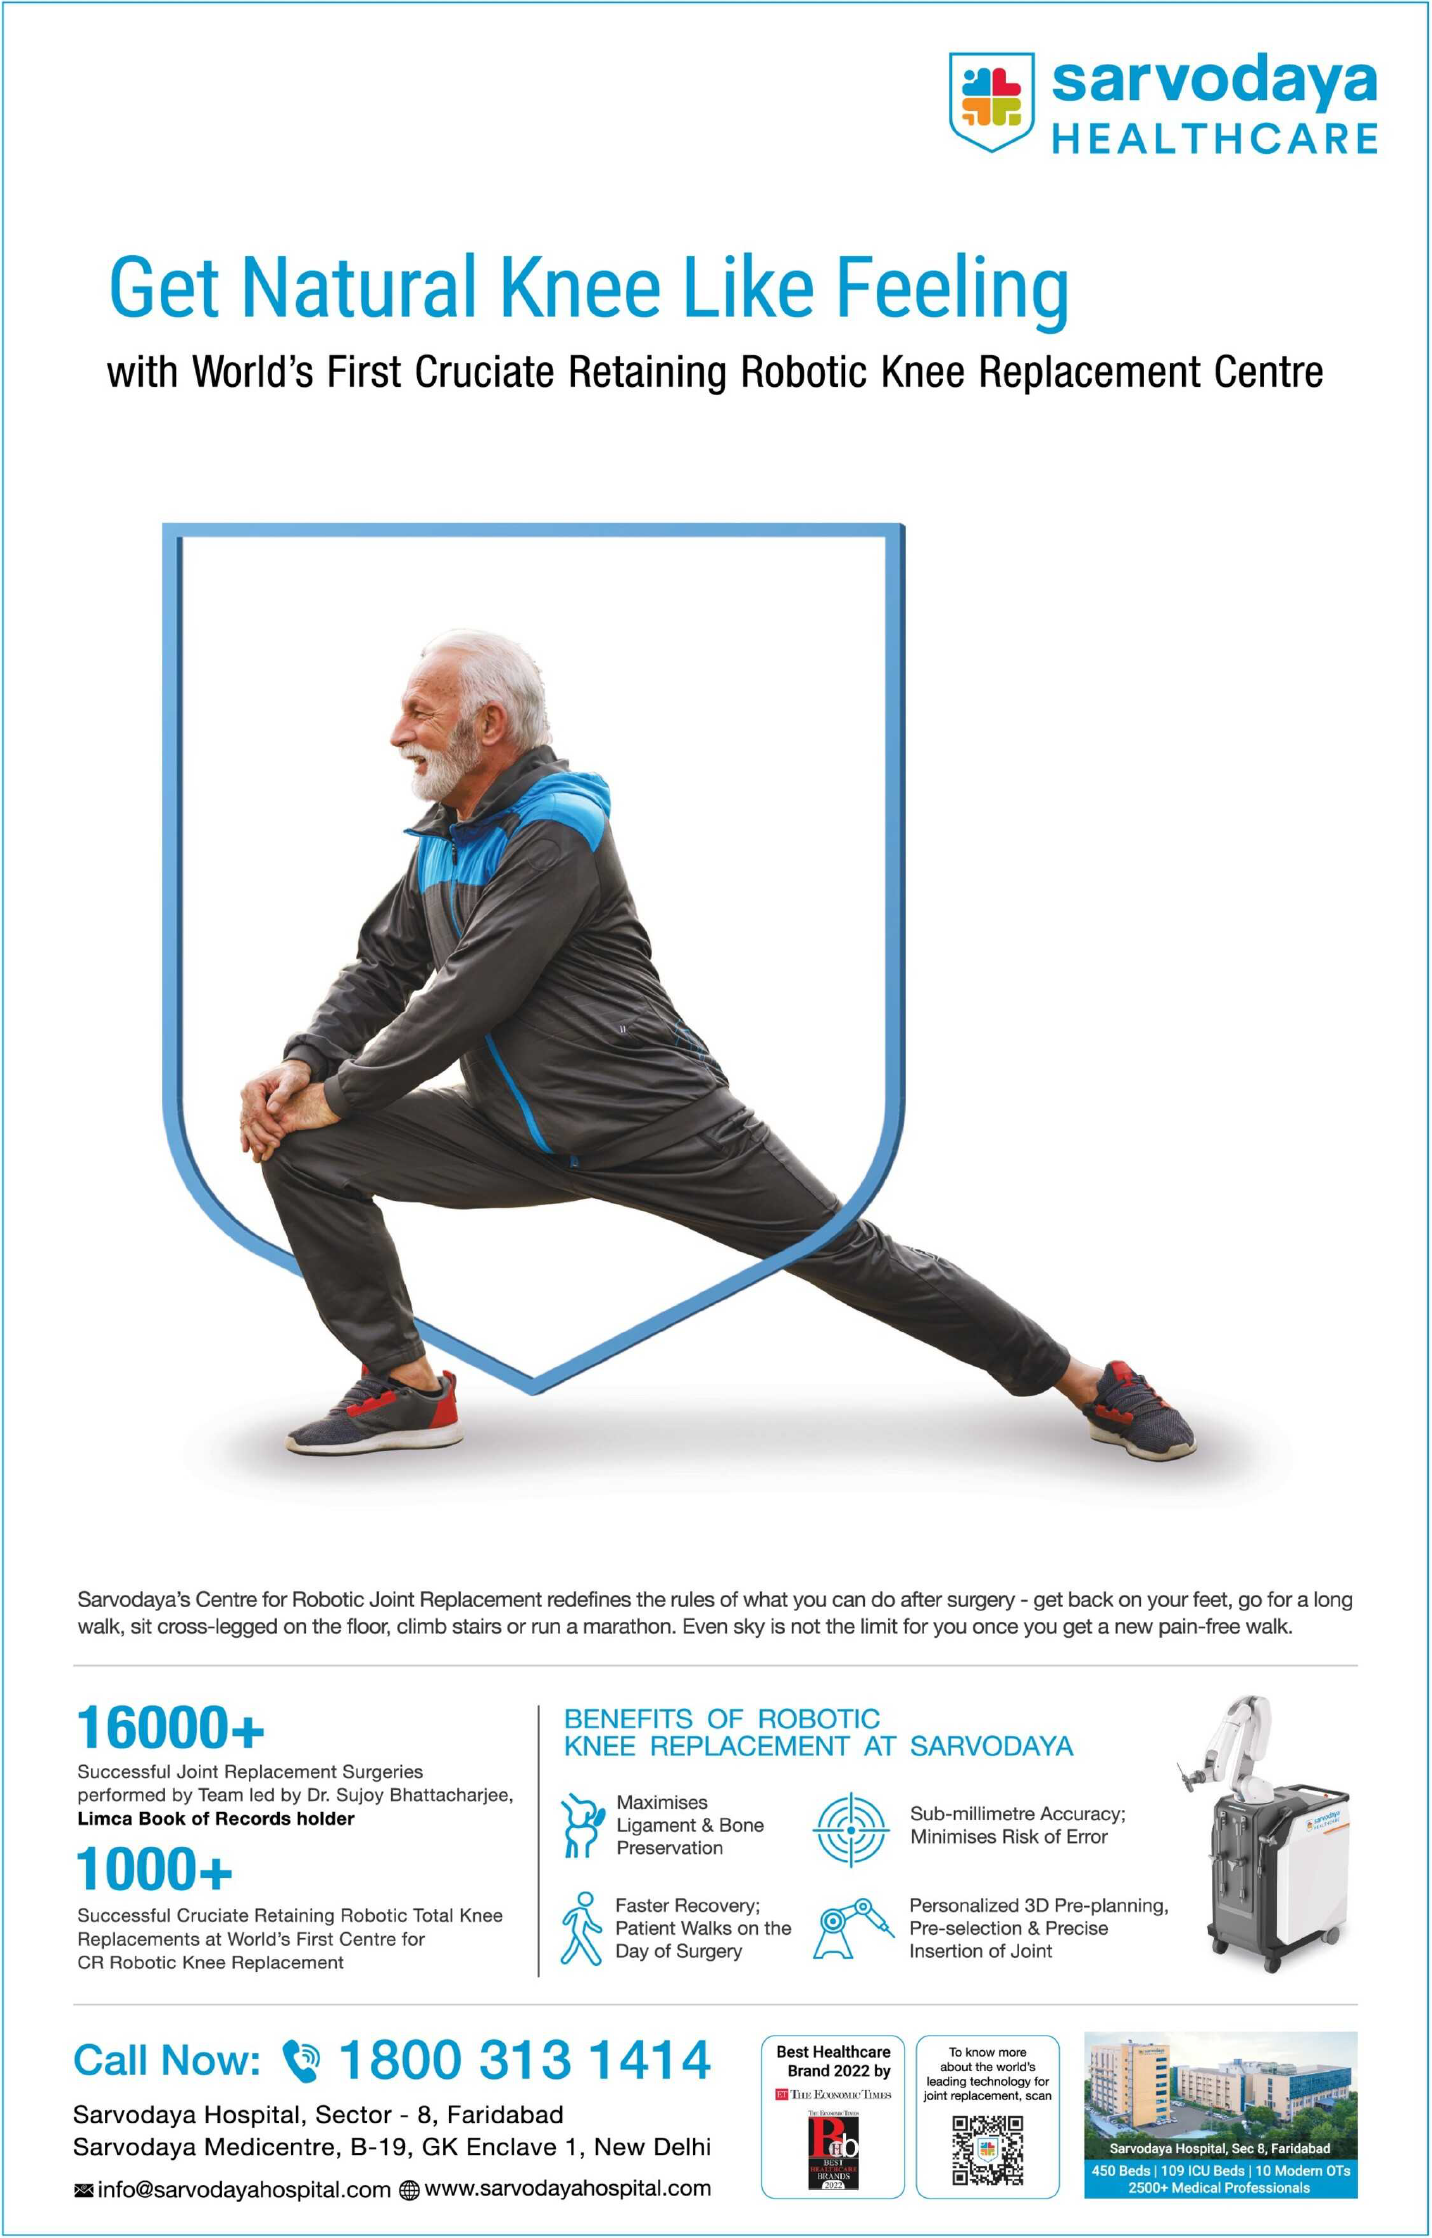 sarvodaya-healthcare-get-natural-knee-like-feeling-with-world's-first-cruciate-retaining-robotic-knee-replacement-centre-ad-hindustan-times-28-04-2023.png